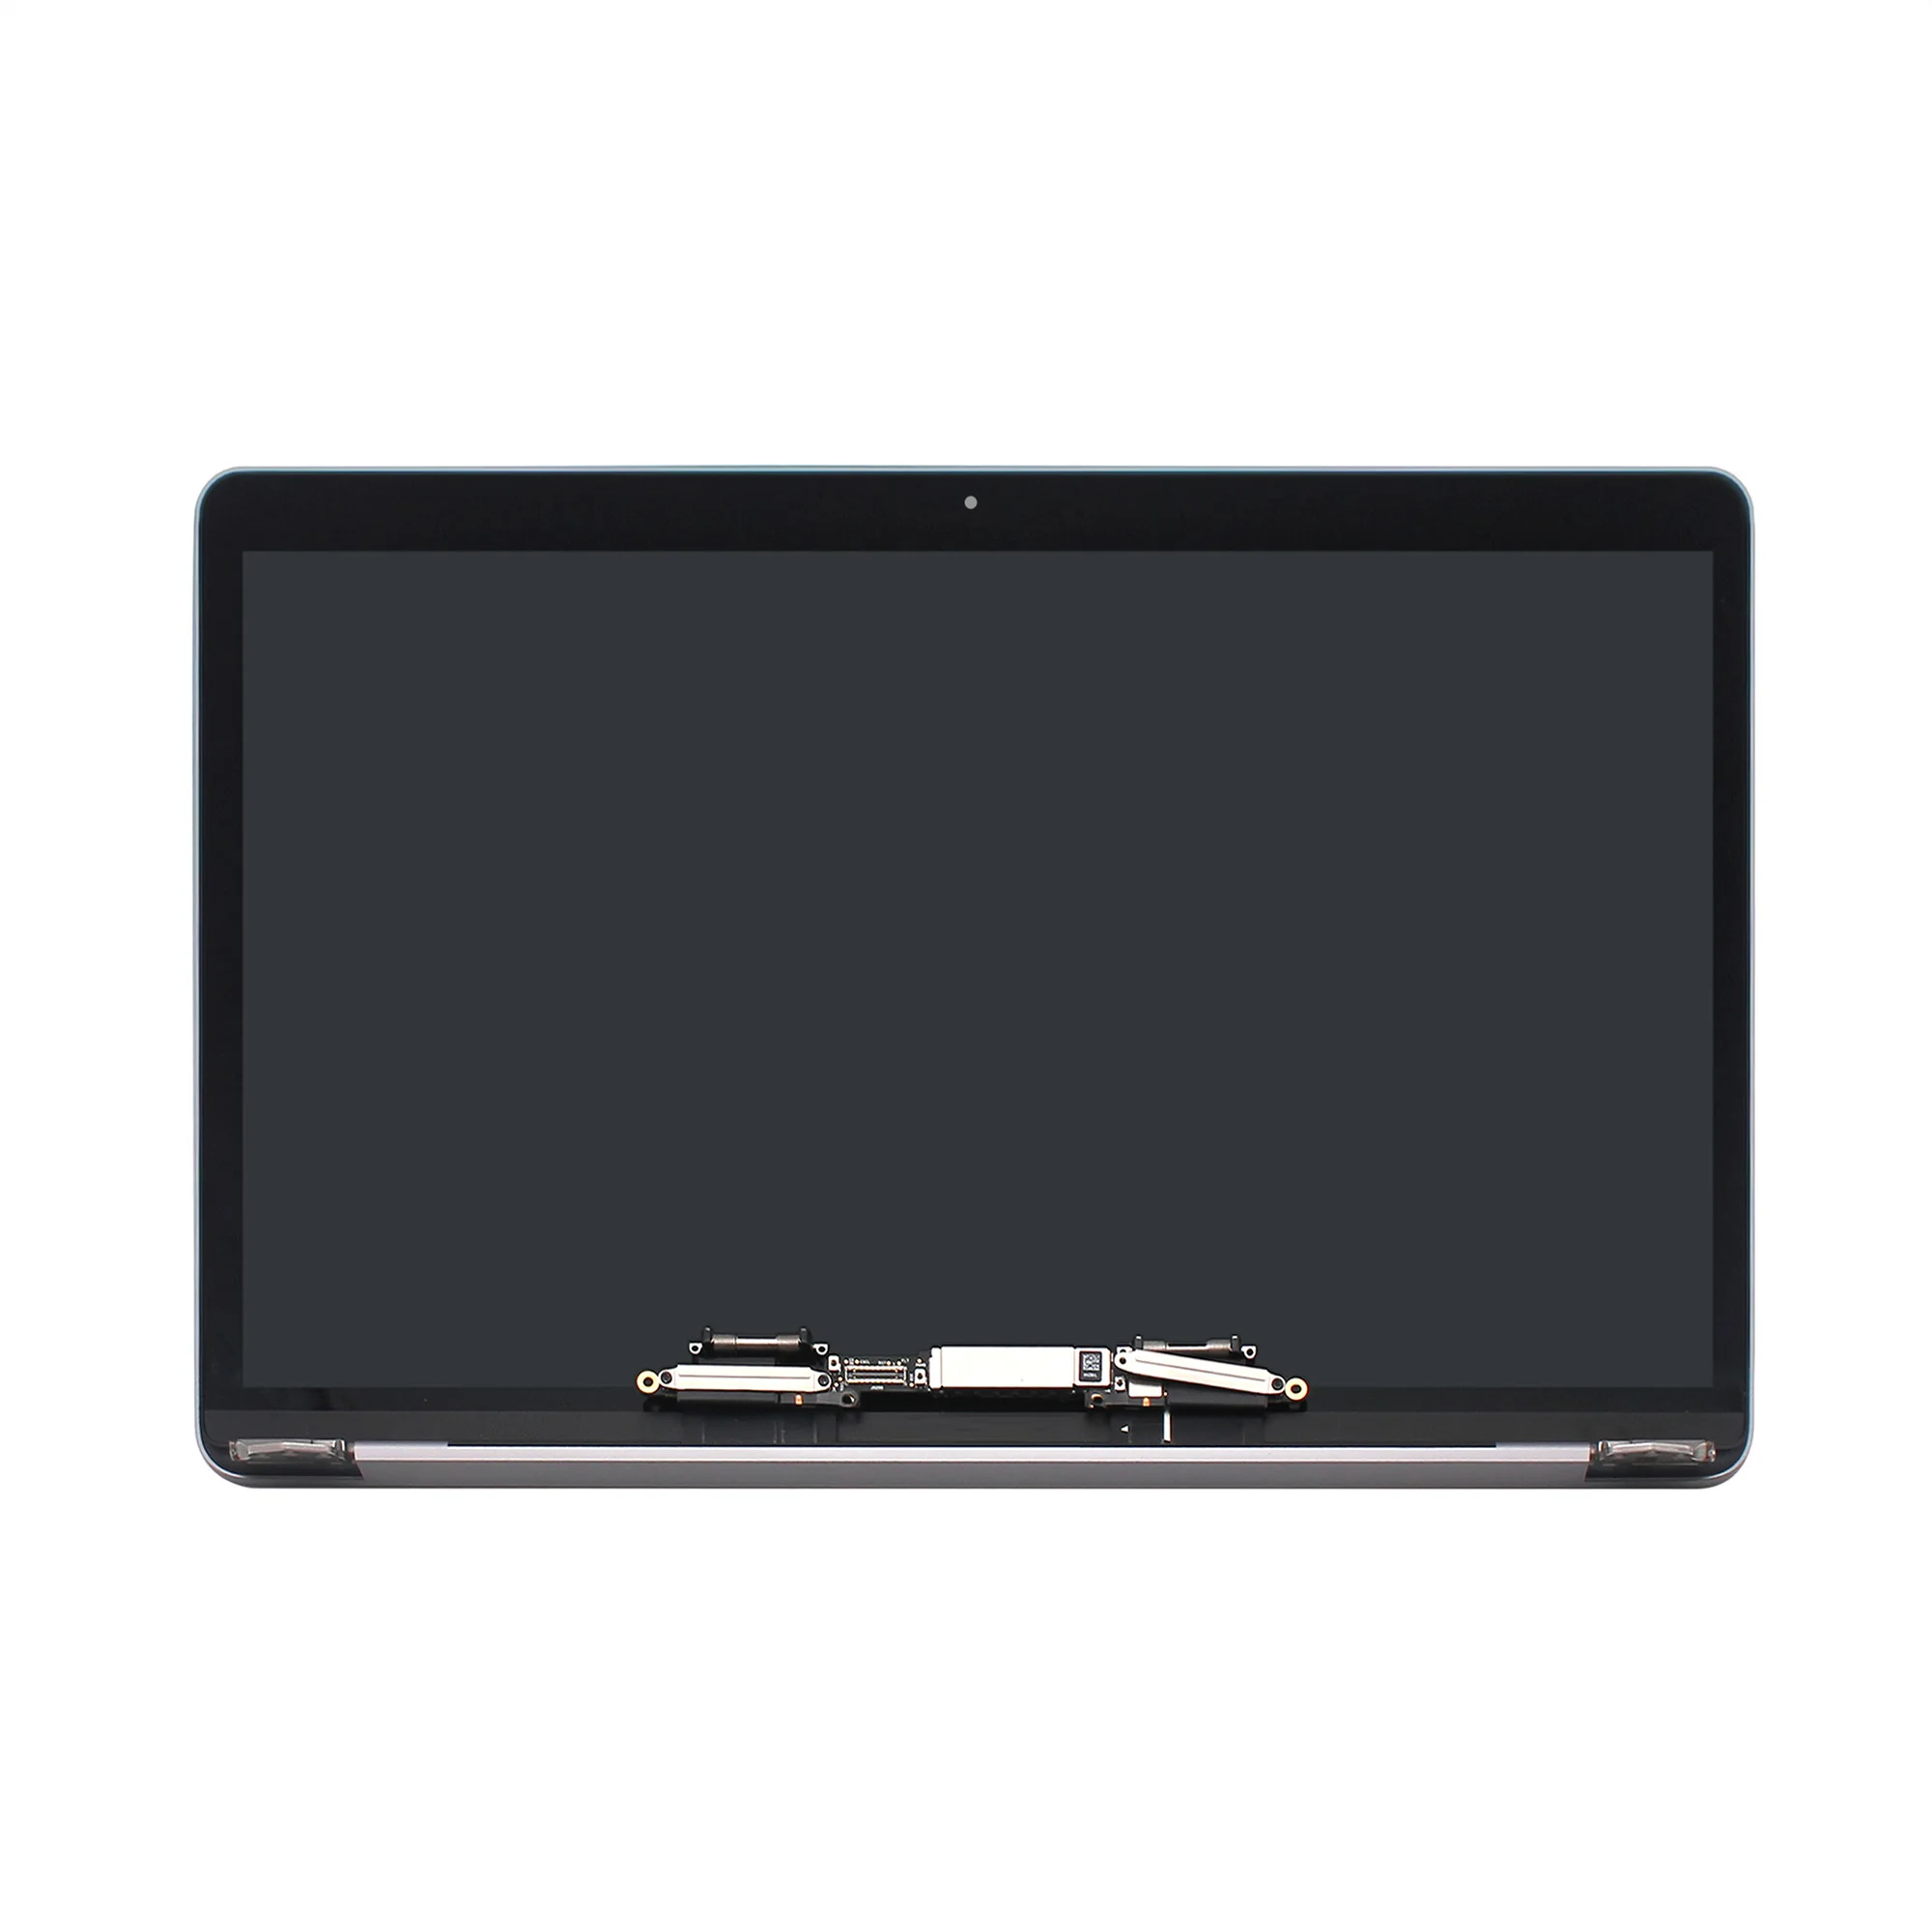 

Original A1706 A1708 lcd 2016 2017 2018 Complete LCD Screen Assembly For Macbook Pro Retina A1706 A1708 Display LCD, Grey /silver